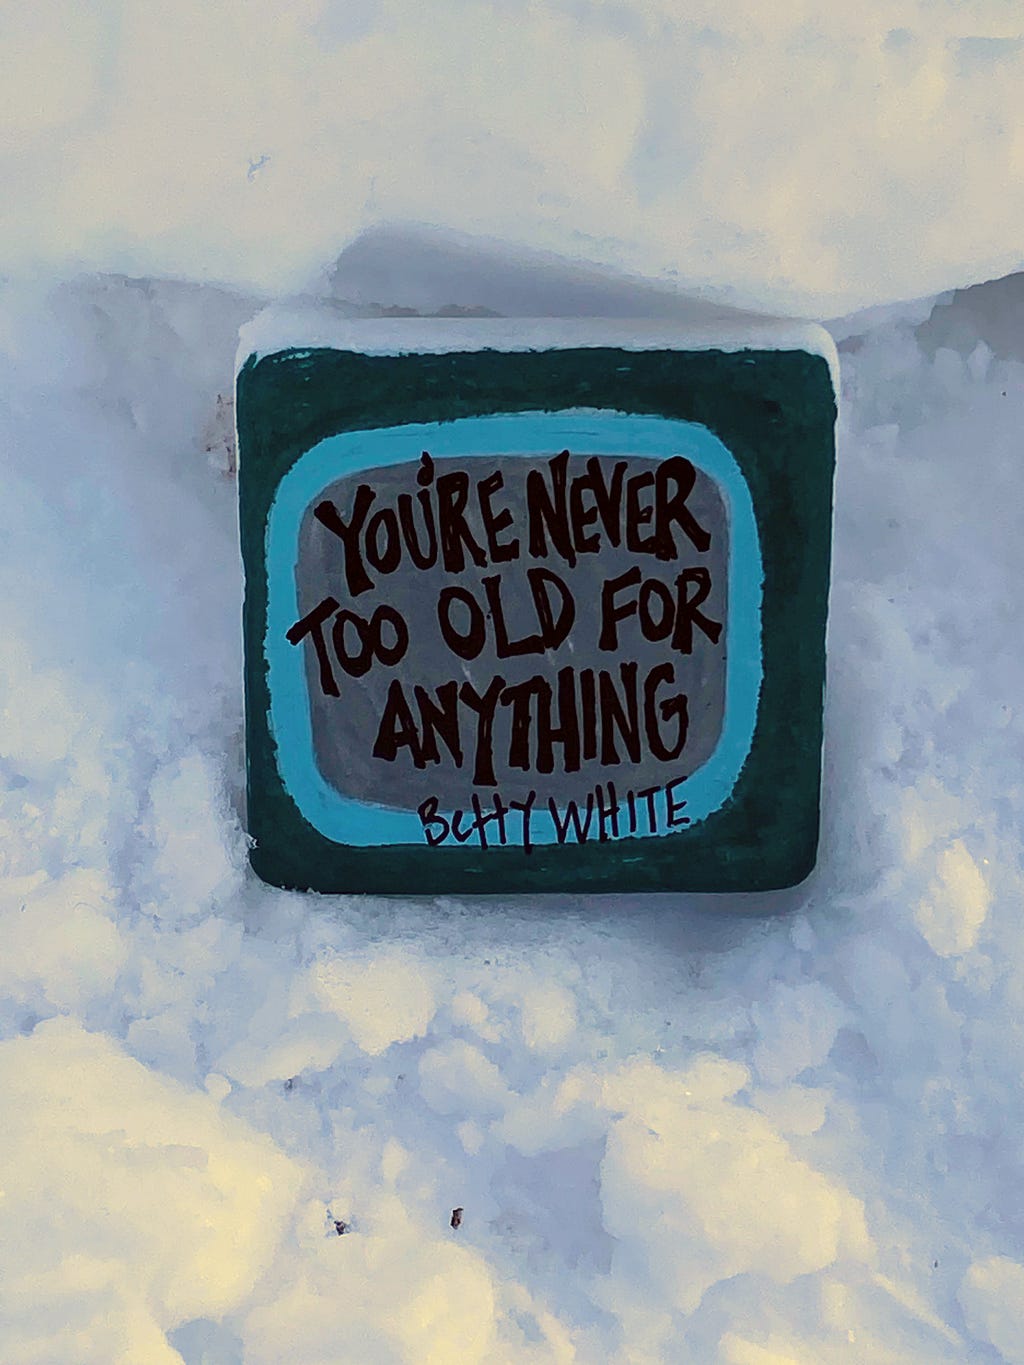 “You’re never too told for anything” by Betty White